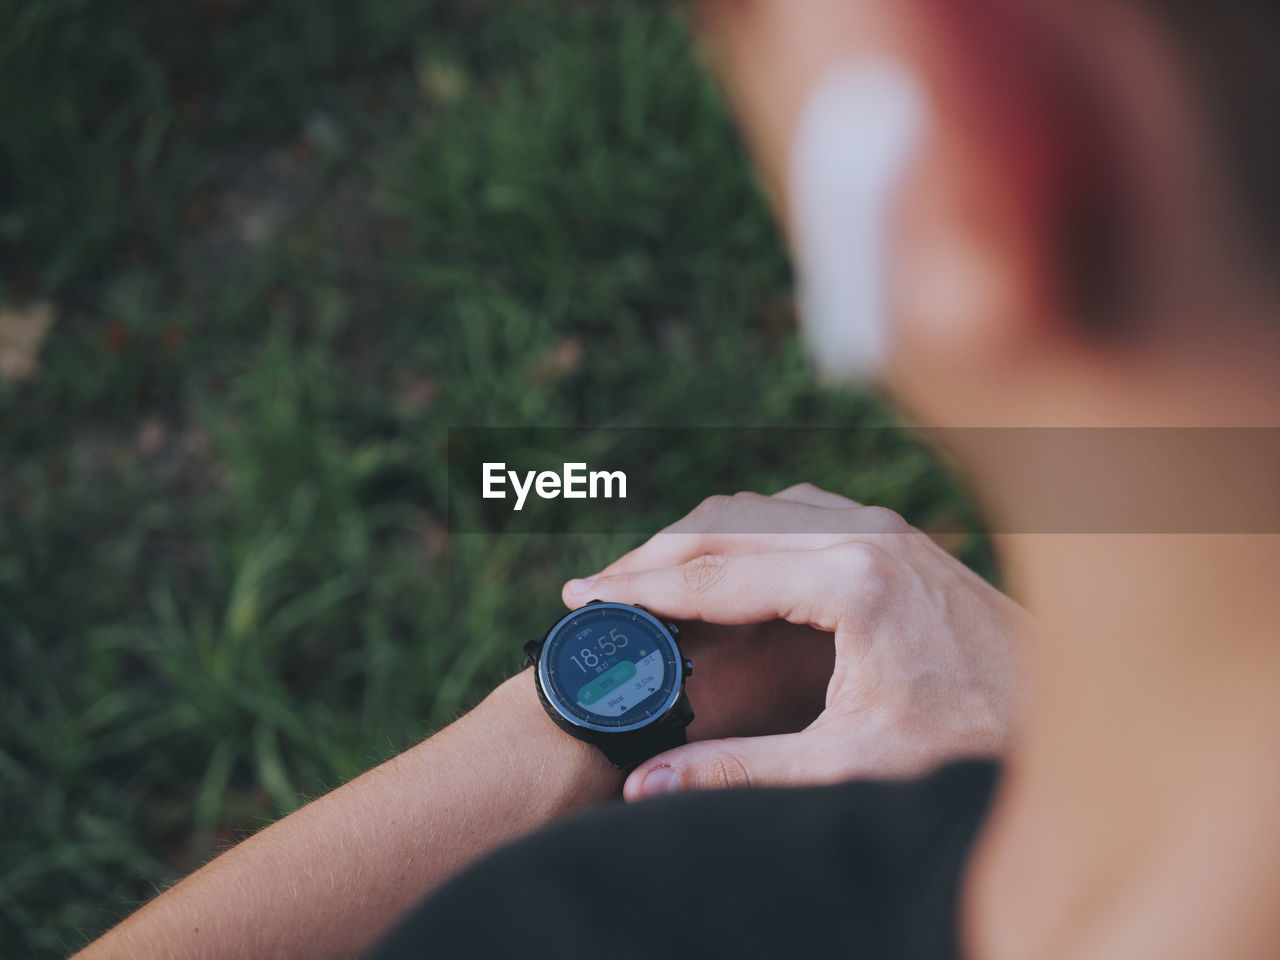 Cropped image of person wearing smart watch